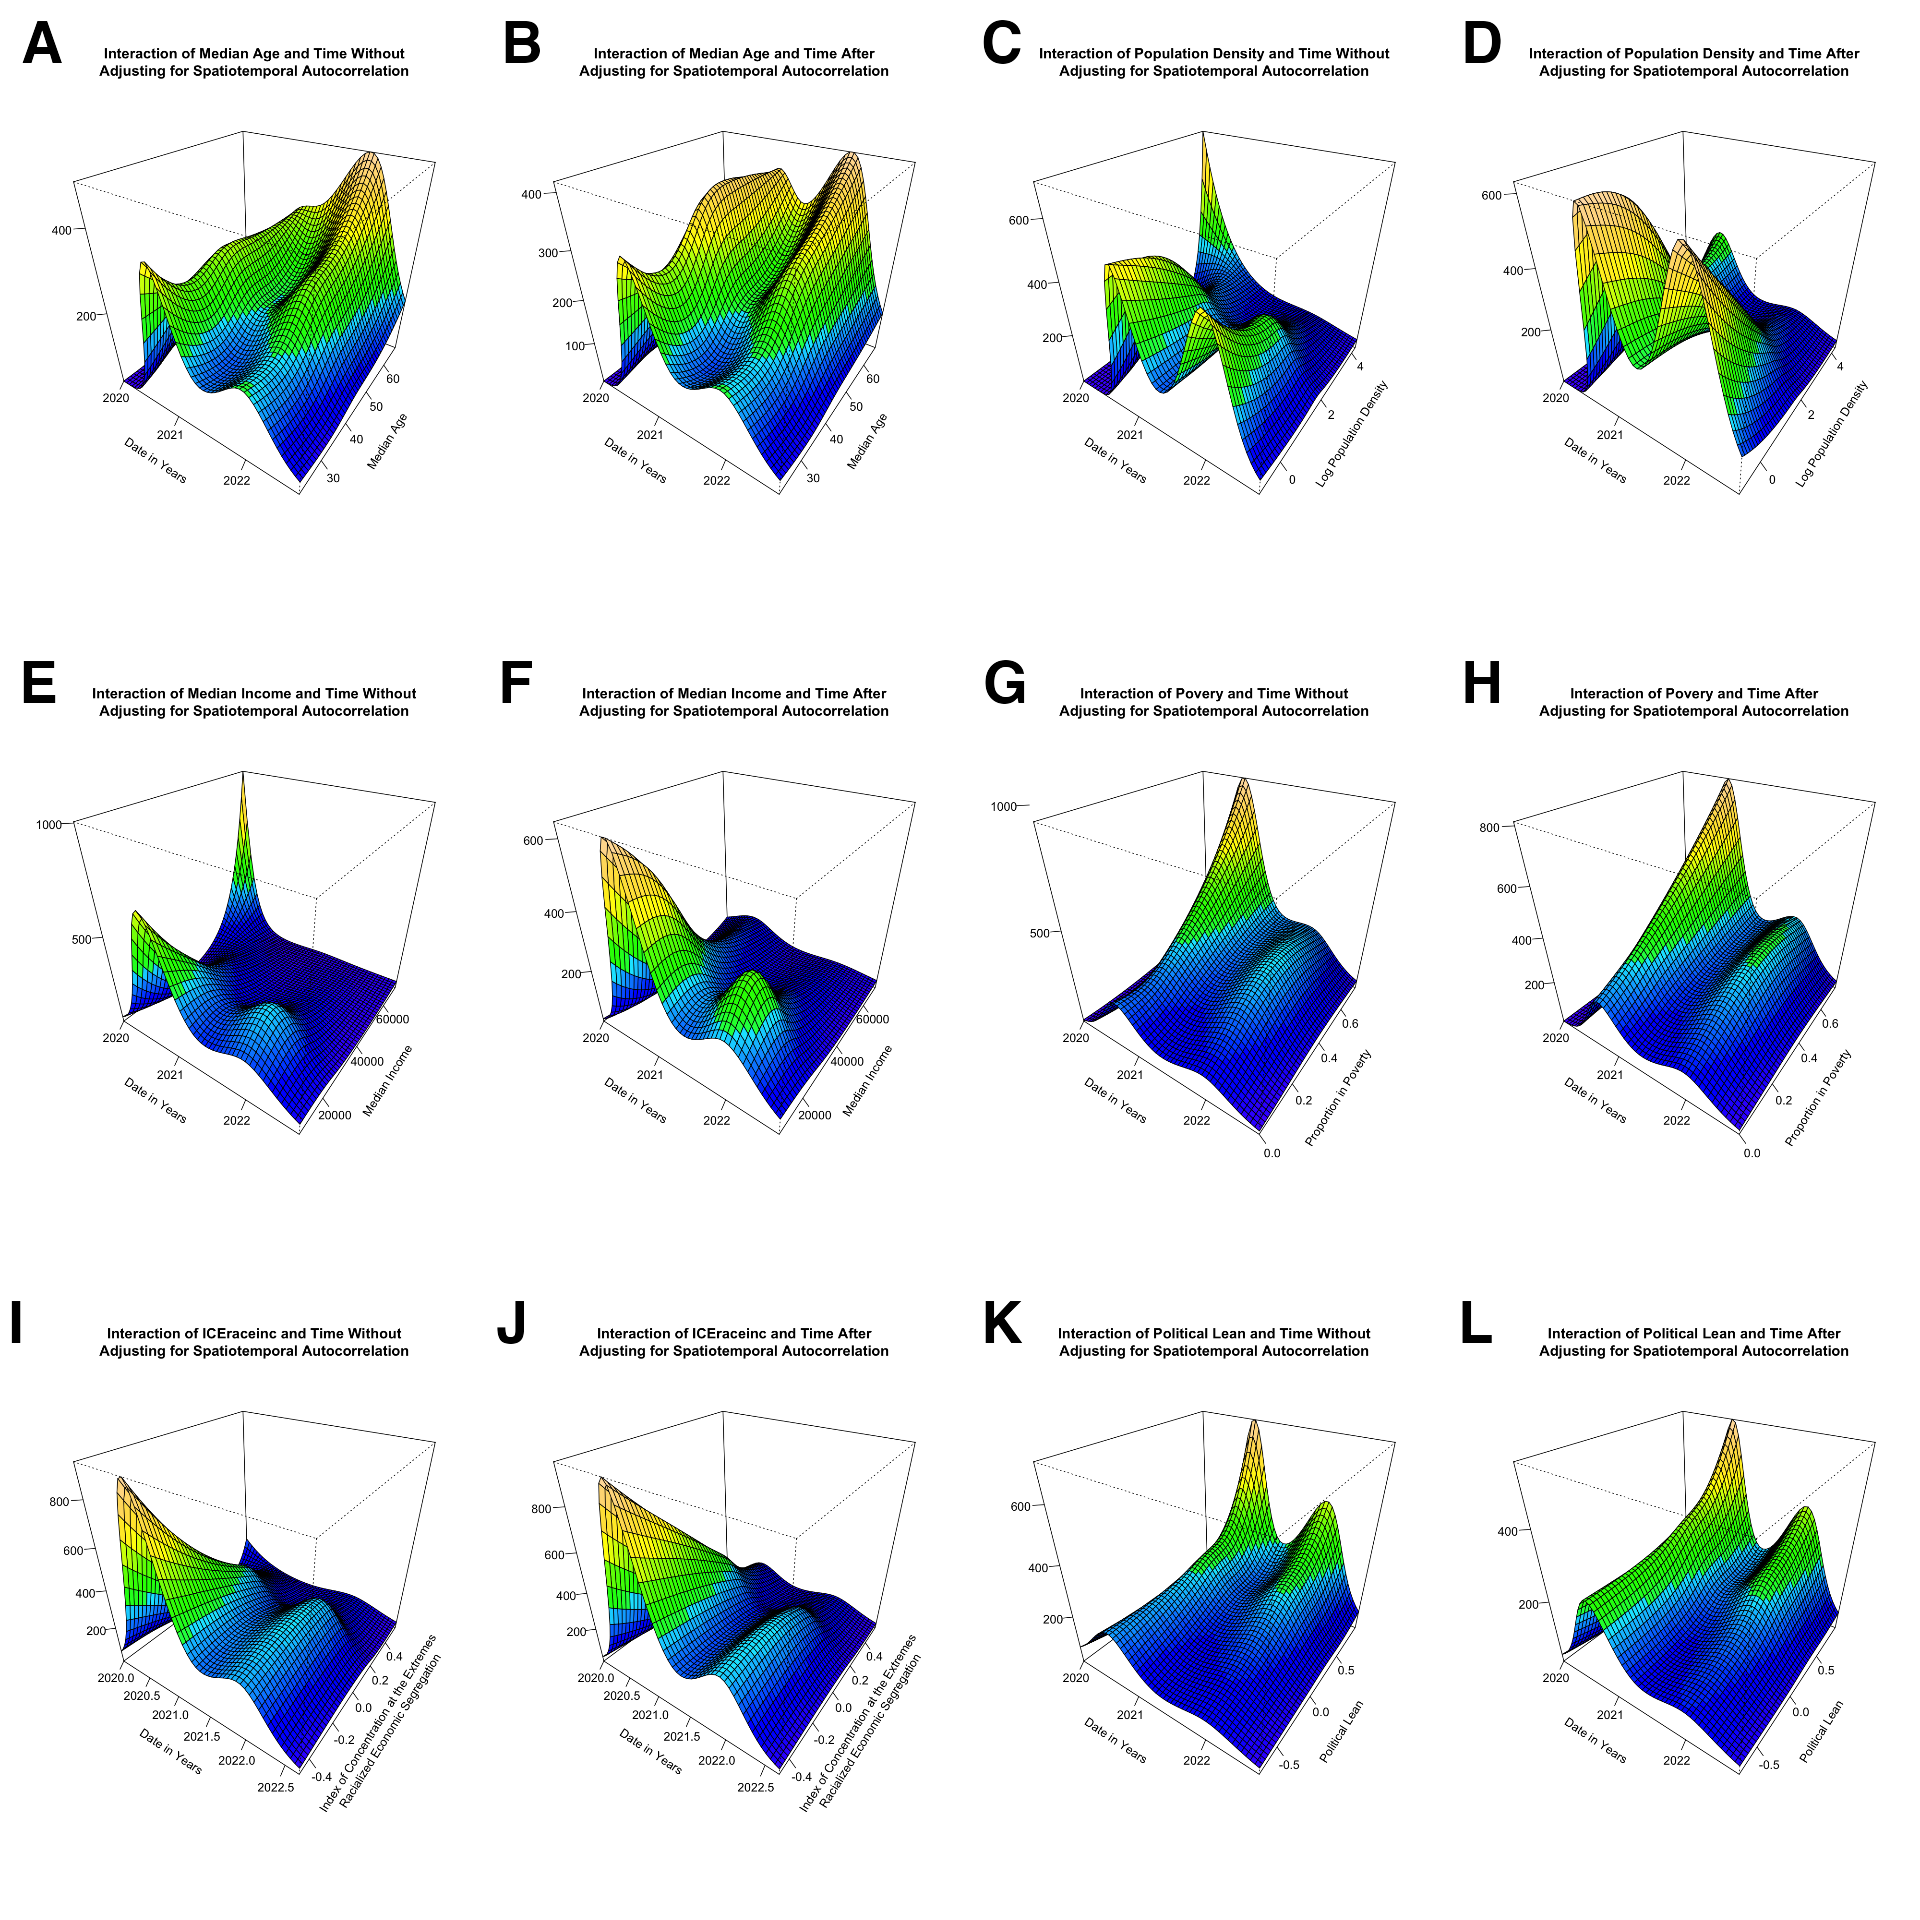 figure showing covariate effects over time without adjusting for spatiotemporal autocorrelation in the top row and with adjustment for spatiotemporal autocorrelation in the bottom row